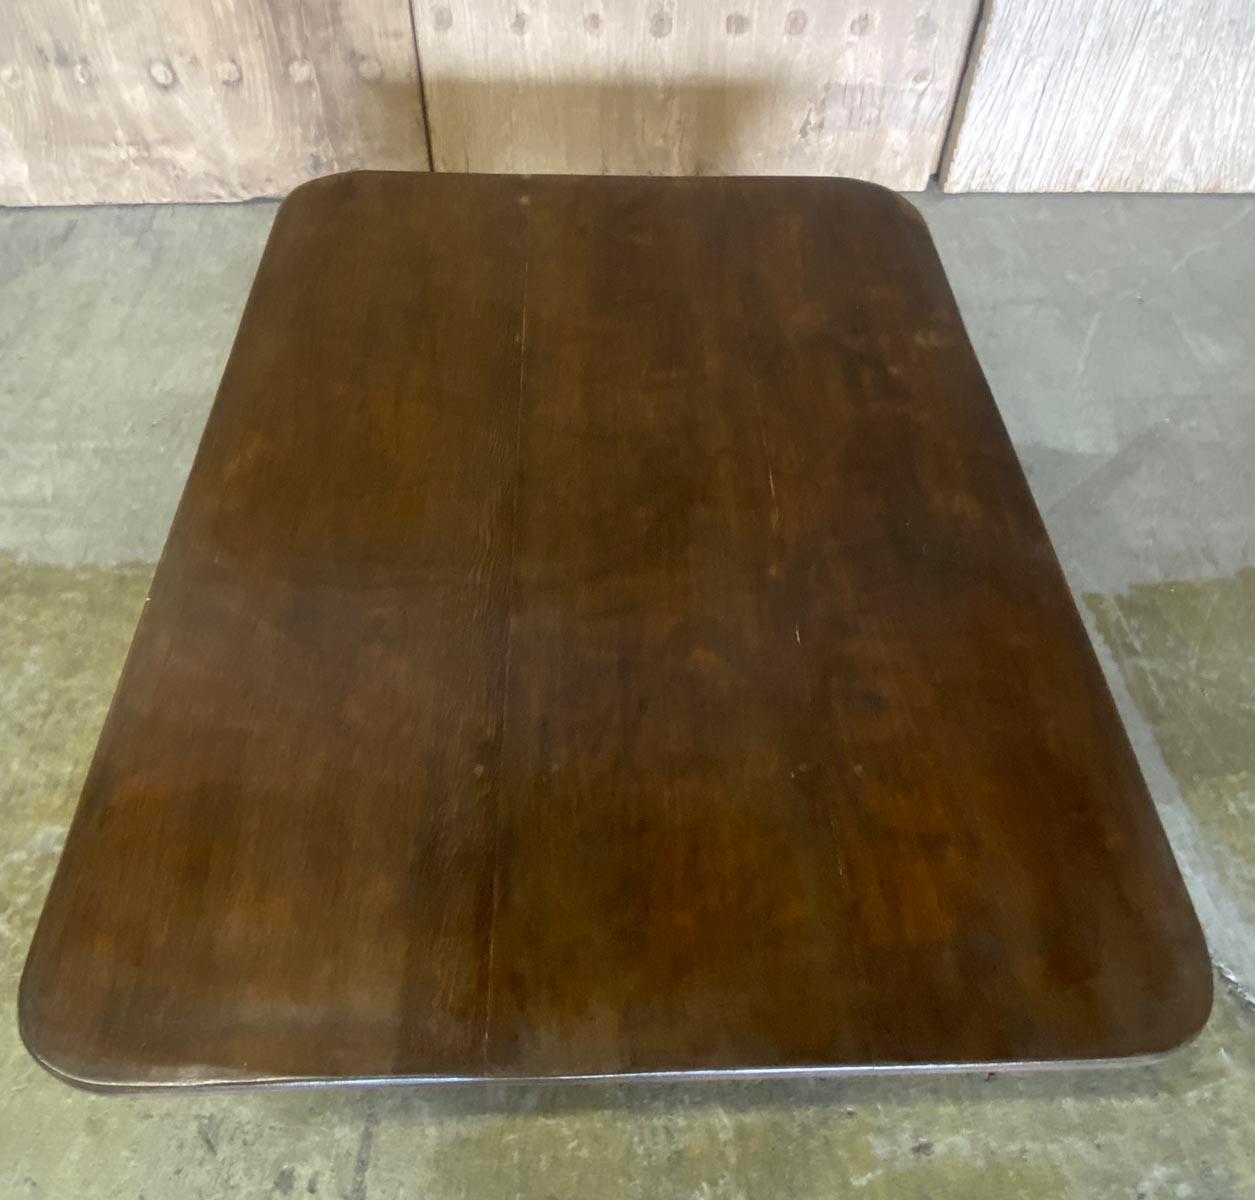 Rustic Coffee Table with Rounded Edges